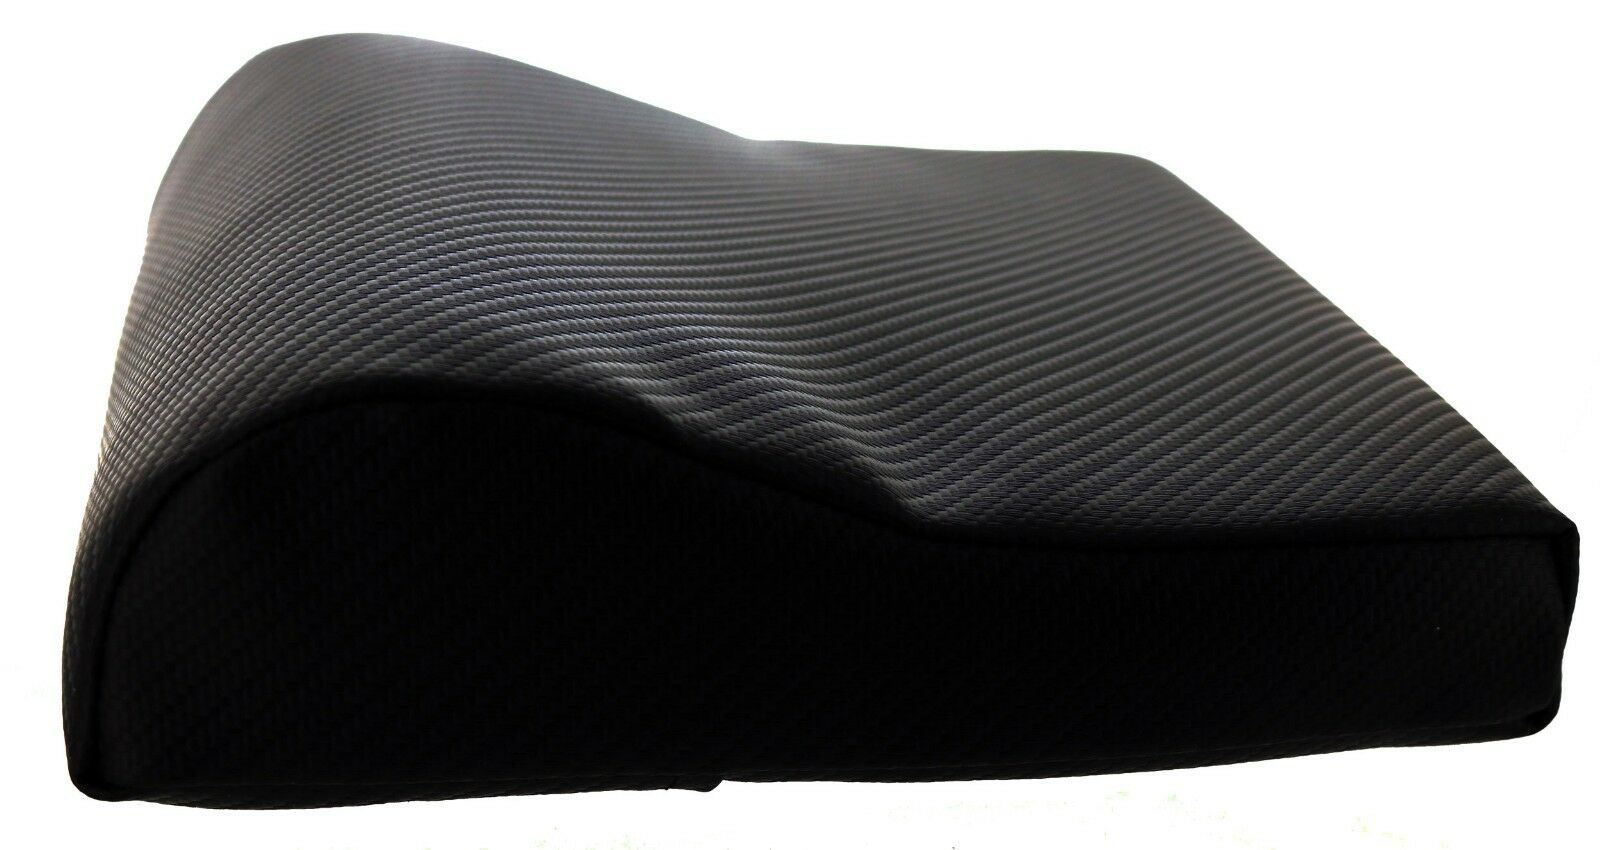 Primary image for Large Black Tanning Bed Contour Pillow with upscale carbon fiber look and feel.